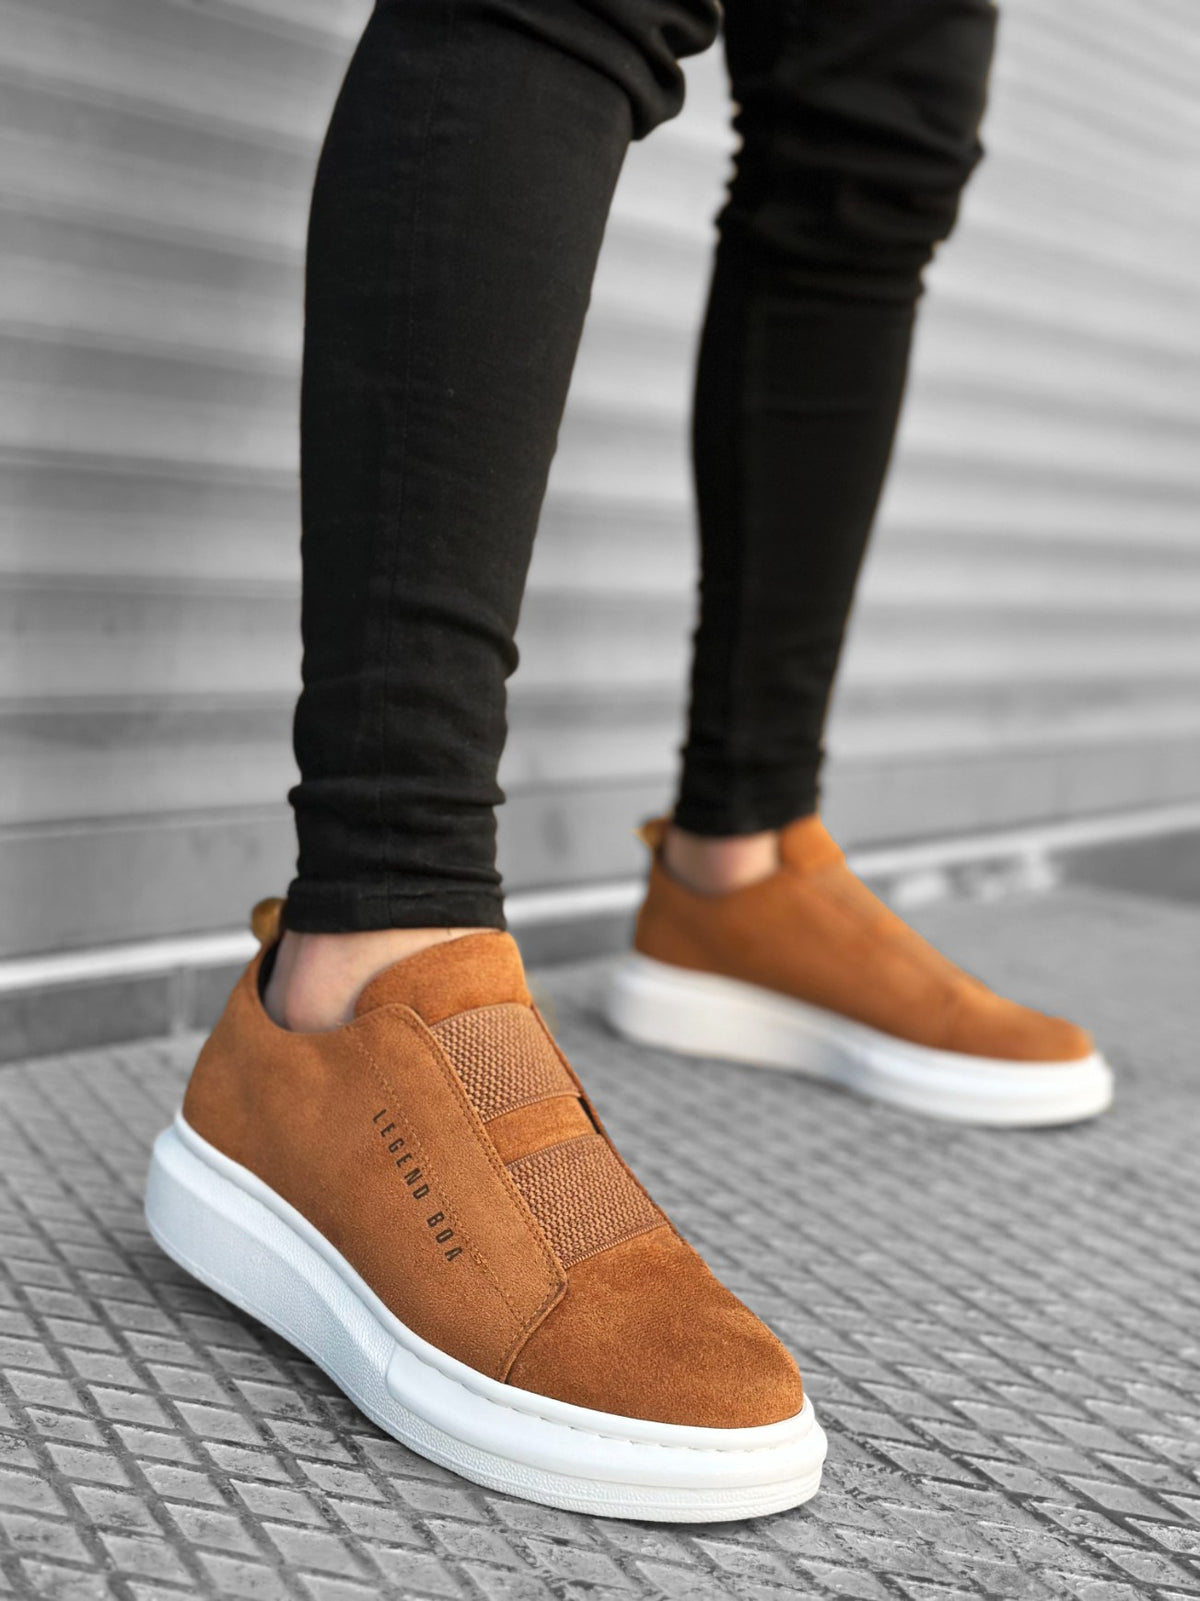 BA0307 BOA Thick Suede High Sole Double Band Tan White Men's sneakers Shoes - STREETMODE™